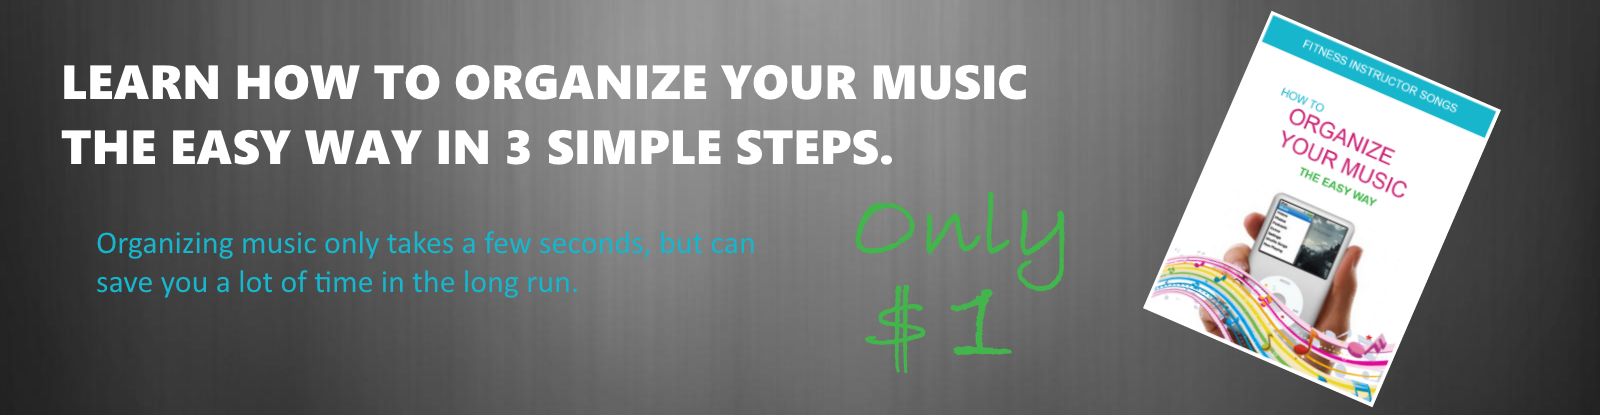 How to Organize Your Music the Easy Way eBook